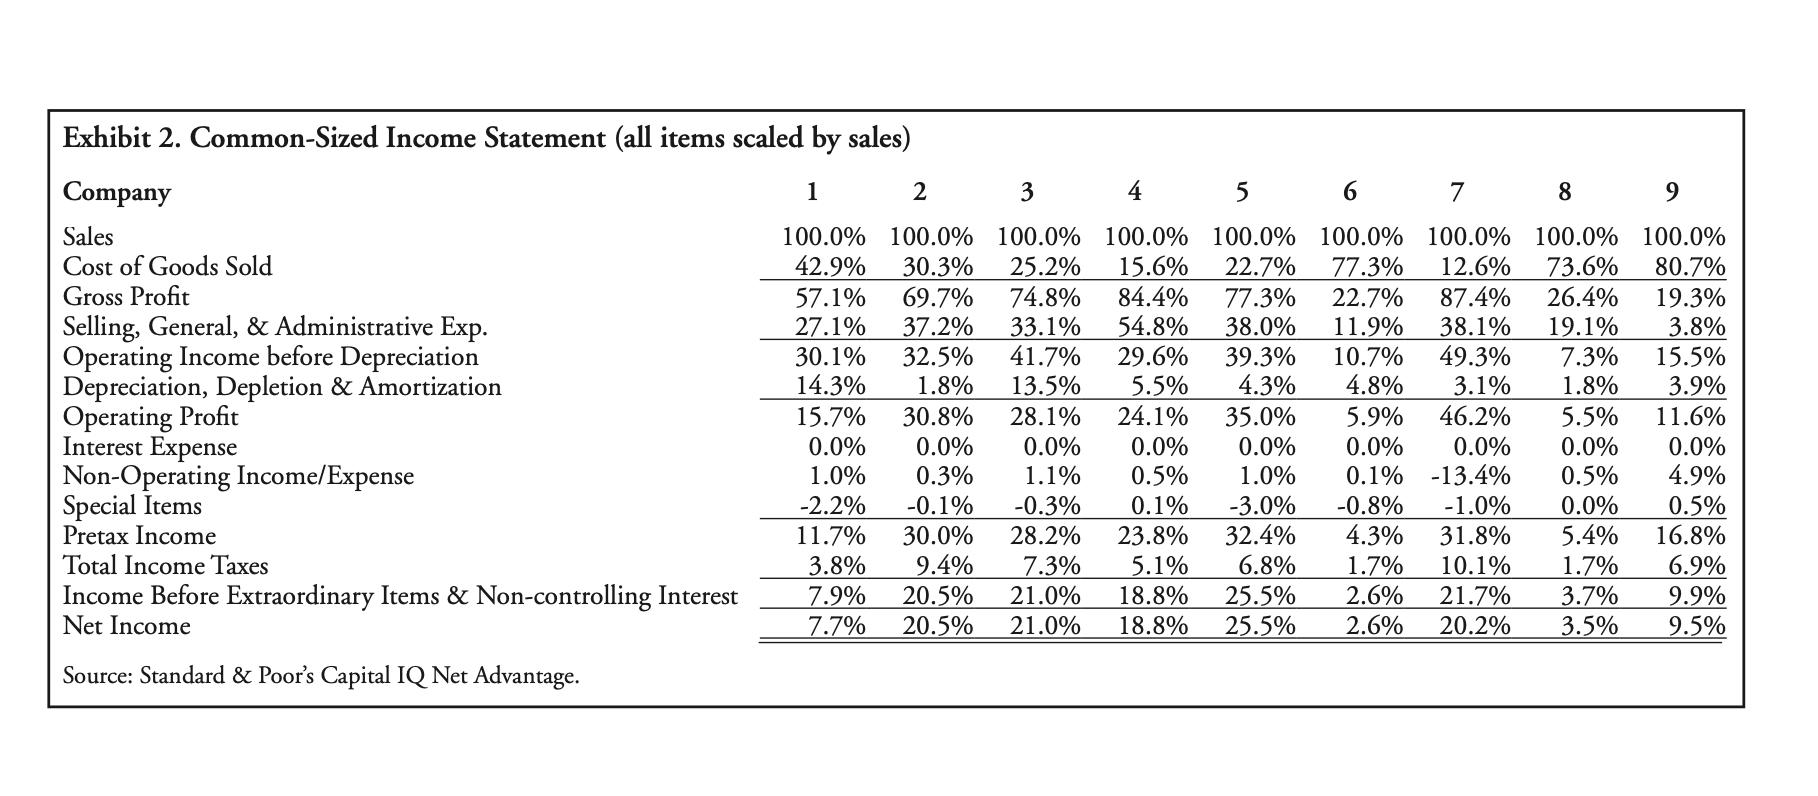 Exhibit 2. Common-Sized Income Statement (all items scaled by sales) Company 1 2 3 4 5 6 7 8 9 Sales 100.0% 100.0% 100.0% 100